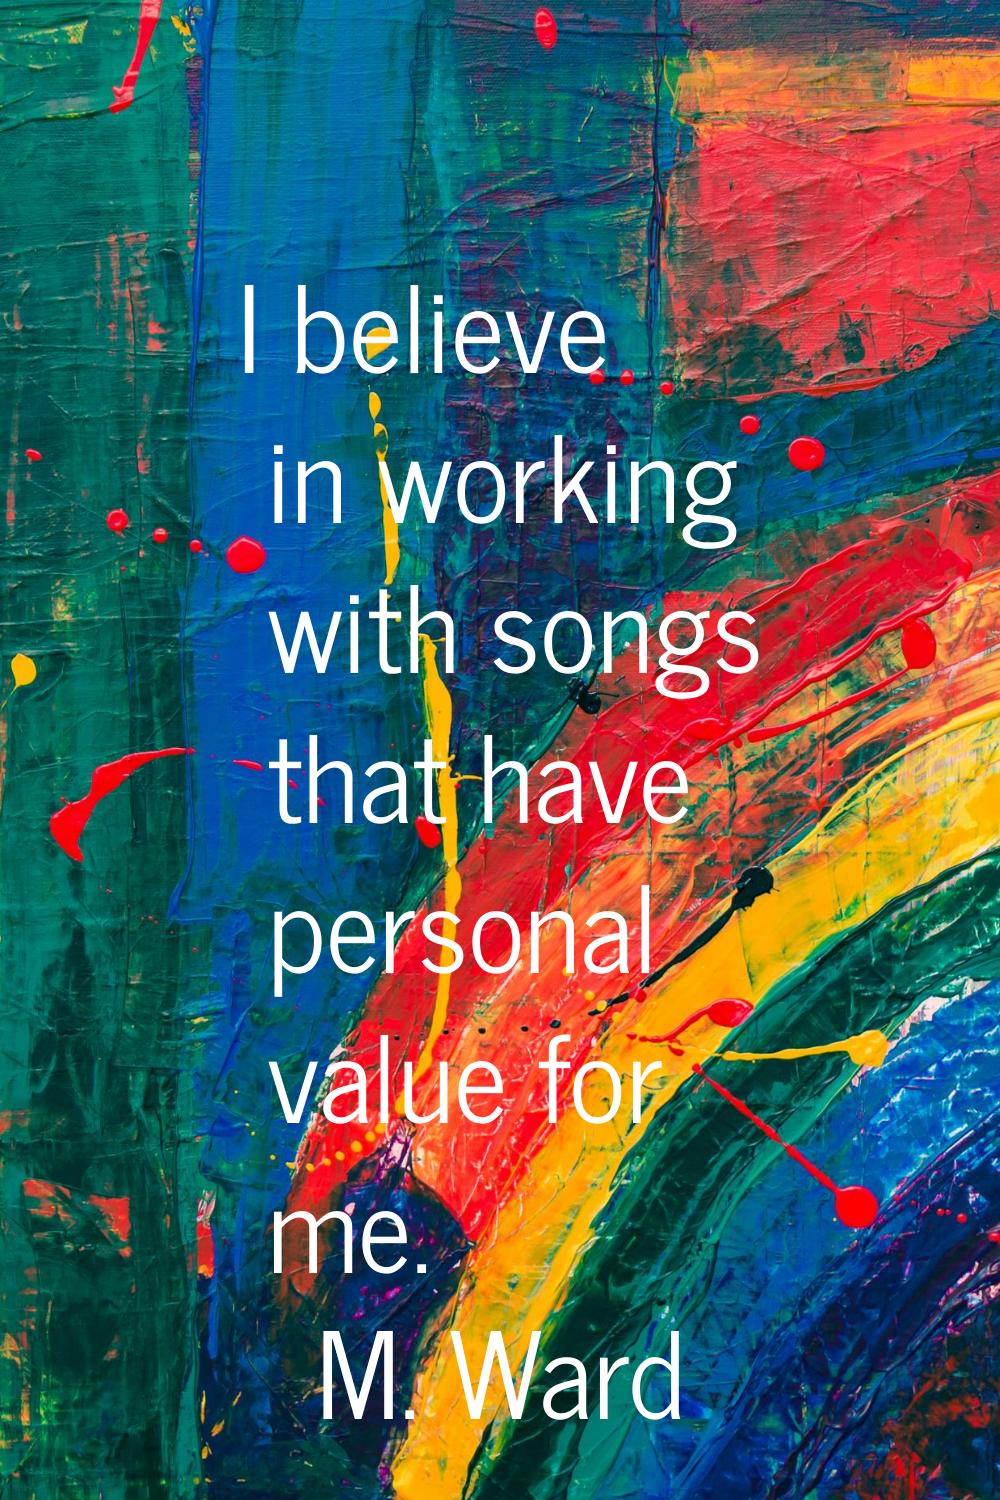 I believe in working with songs that have personal value for me.